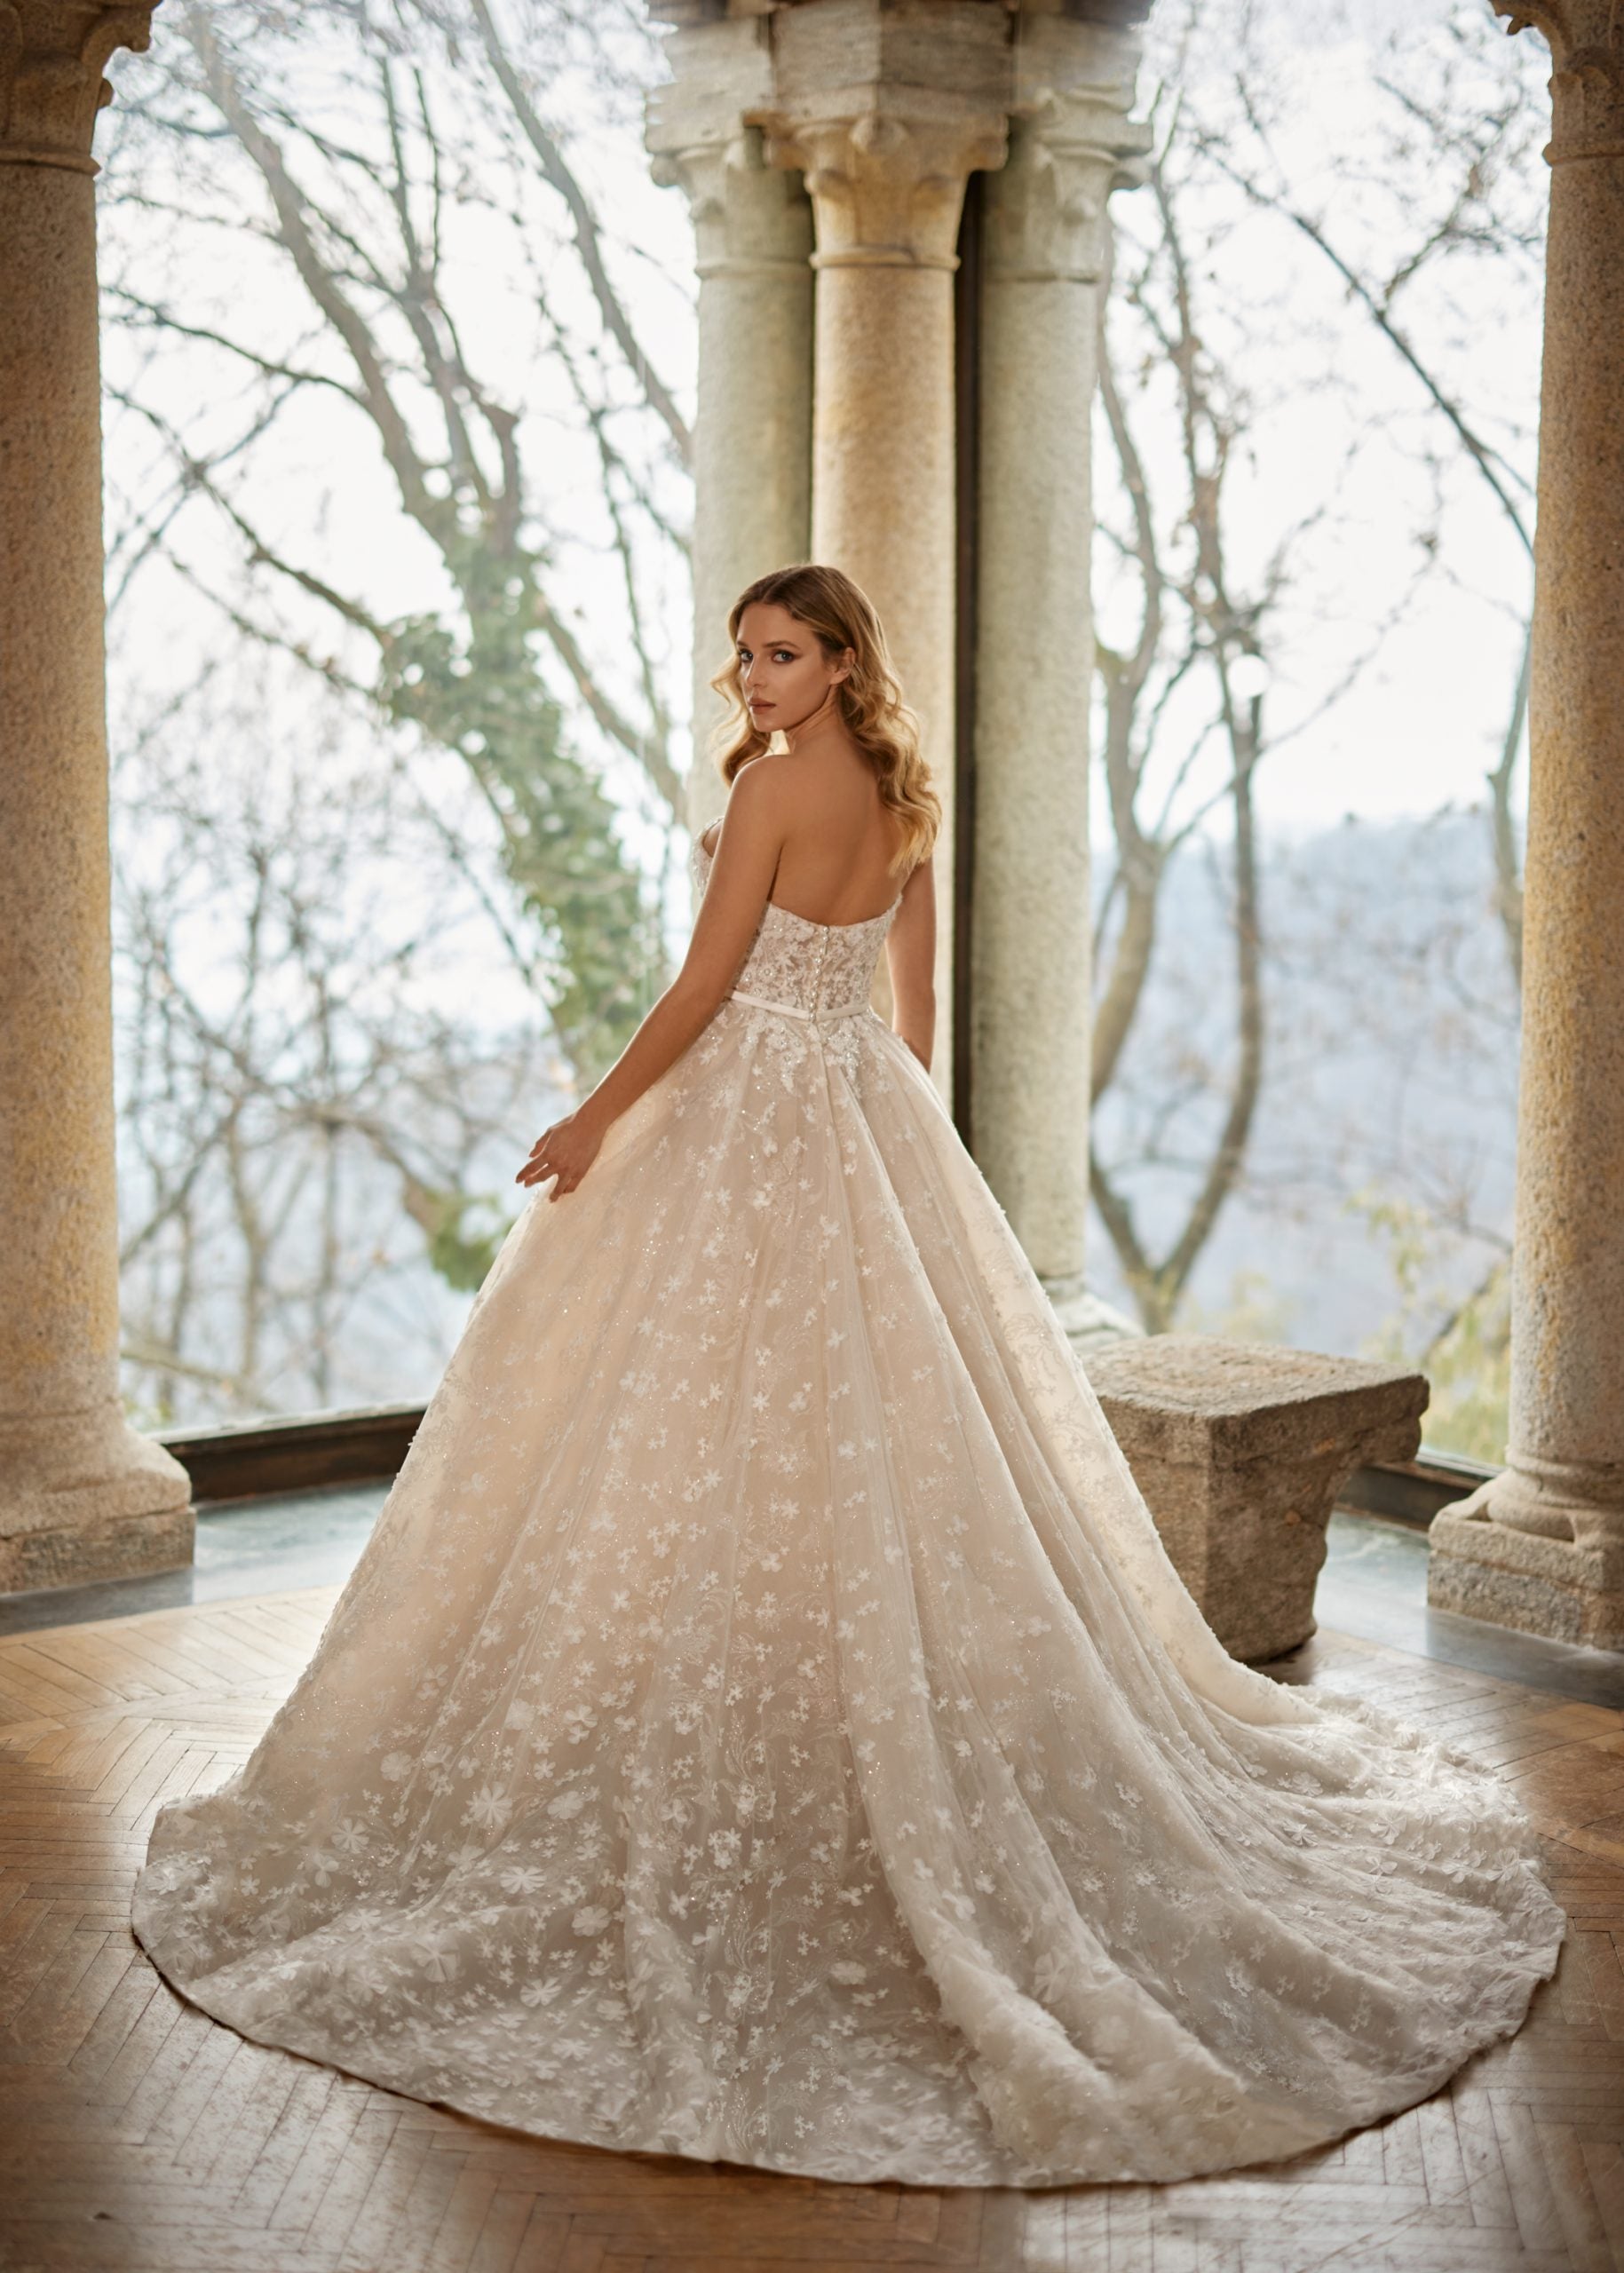 Romantic Scoop-necked Strapless Gown by Randy Fenoli - Image 2